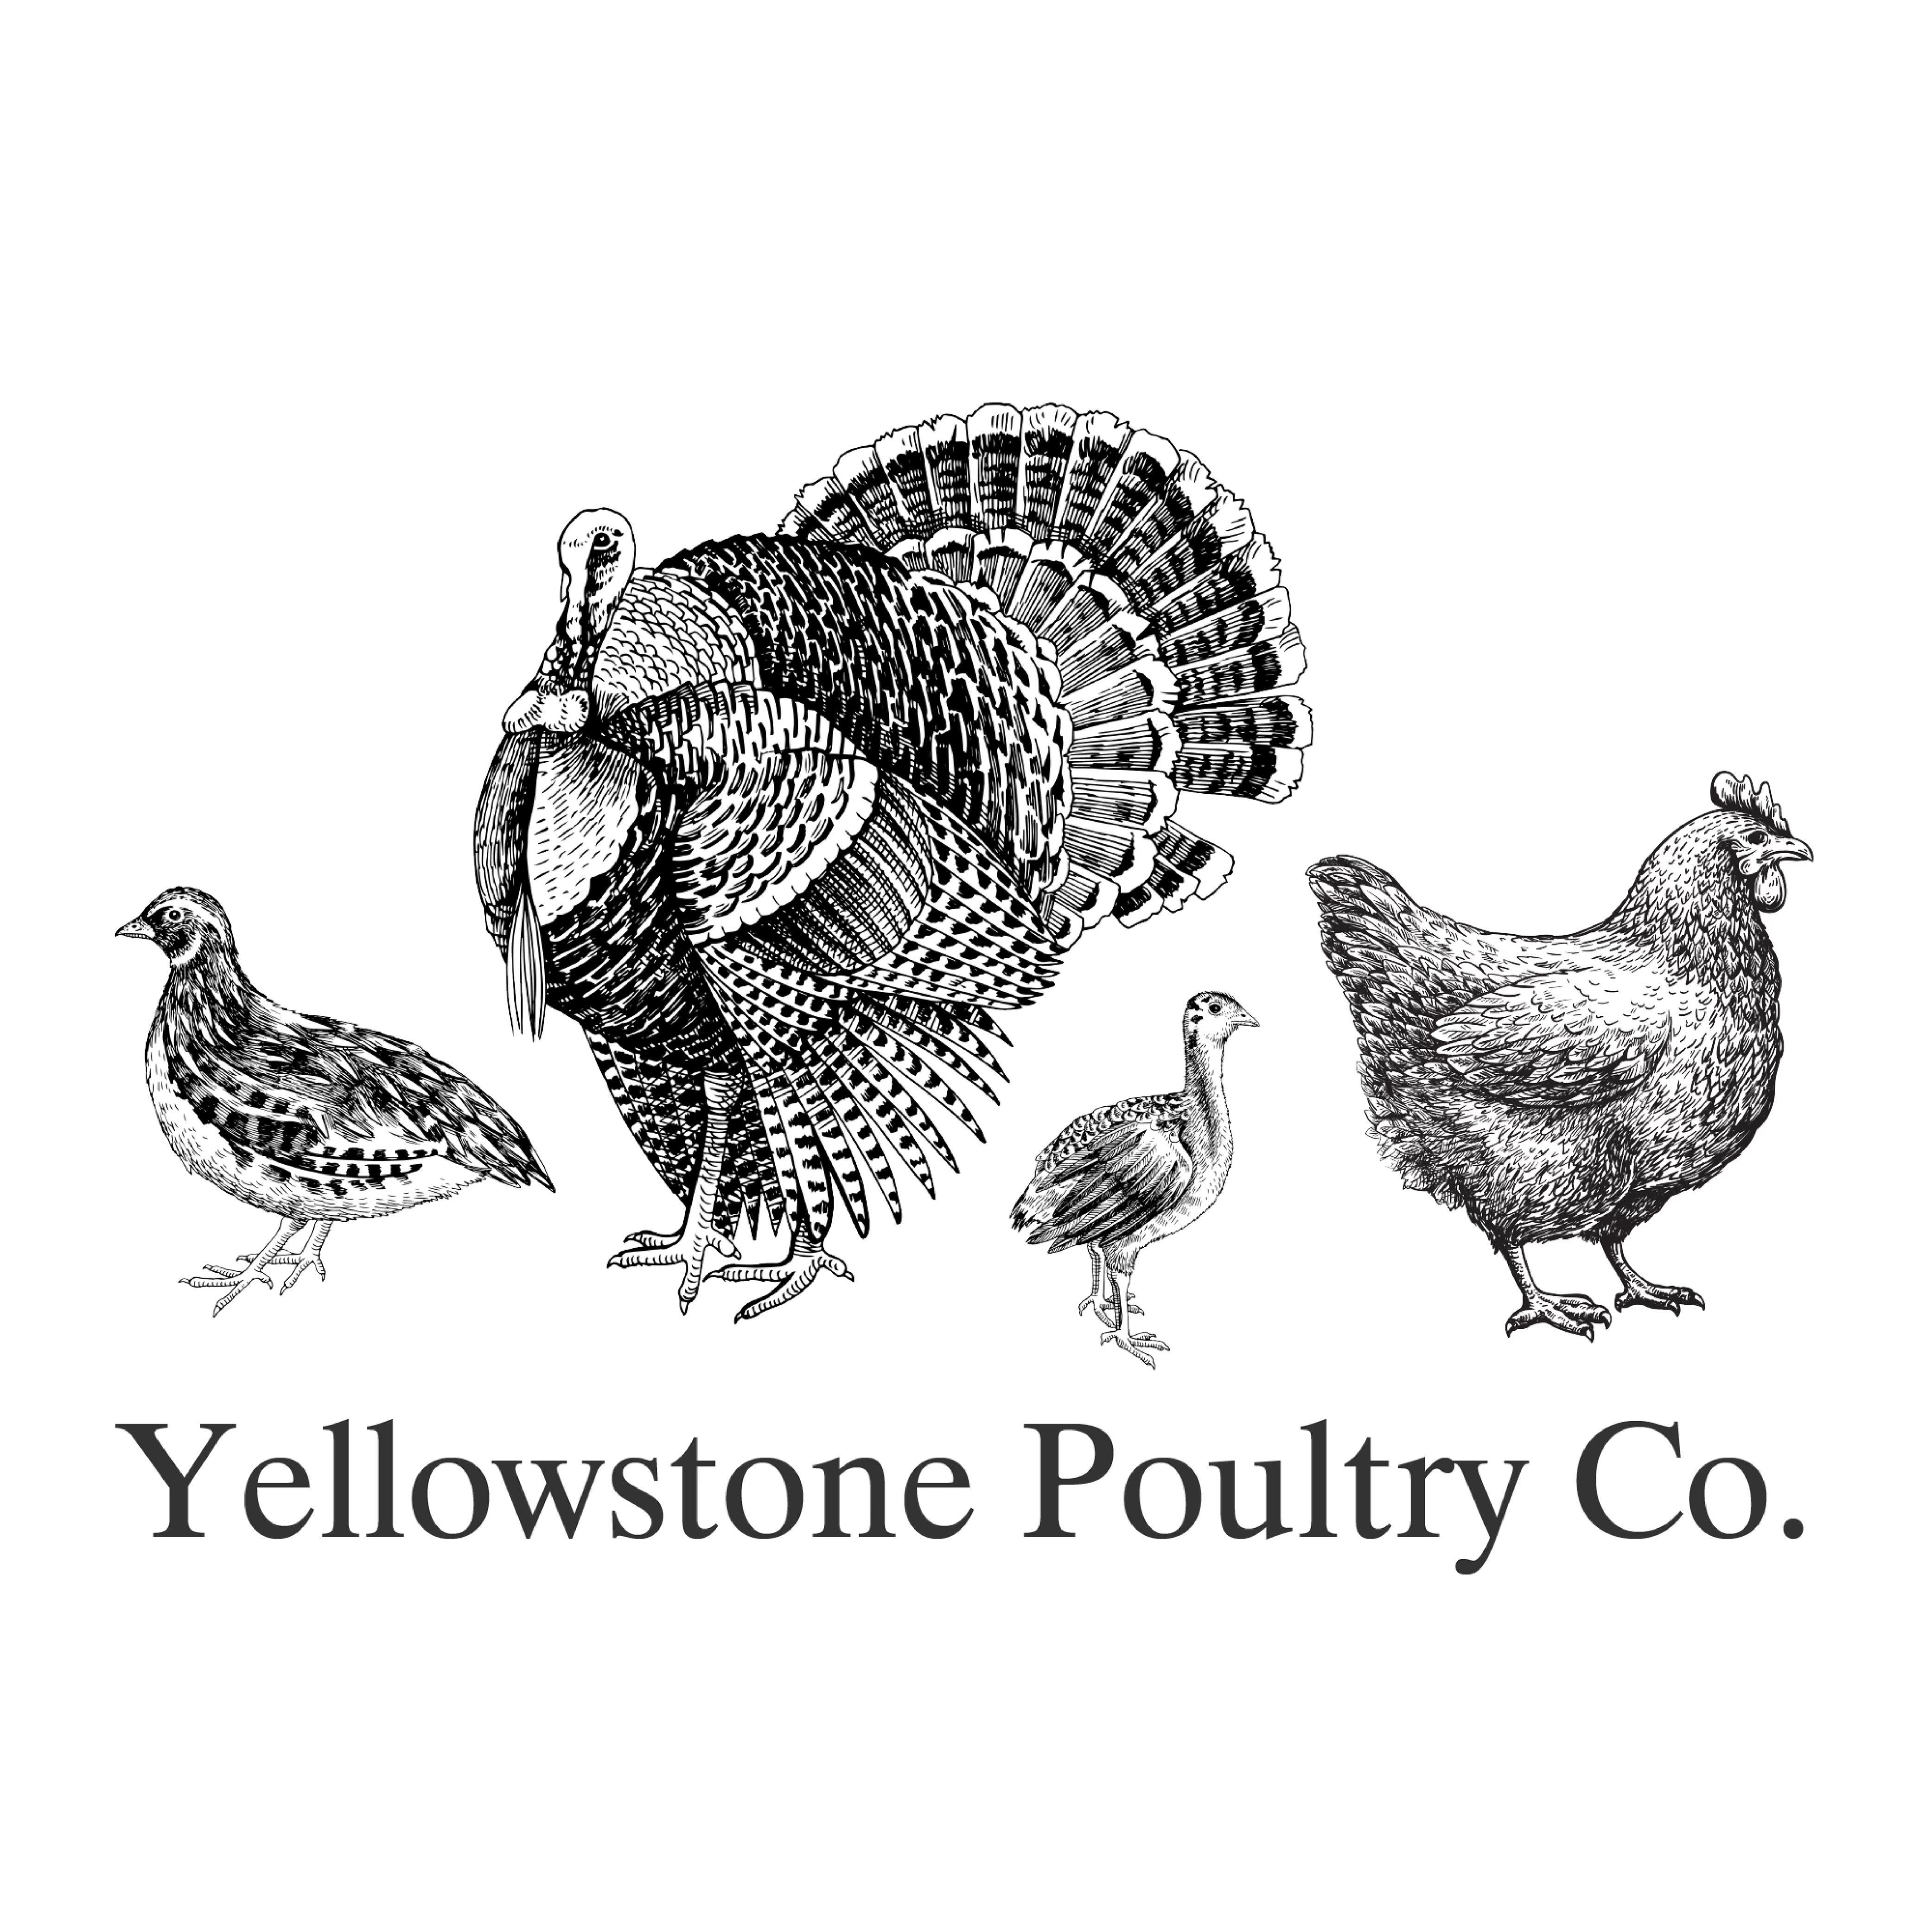 Yellowstone Poultry Co. 